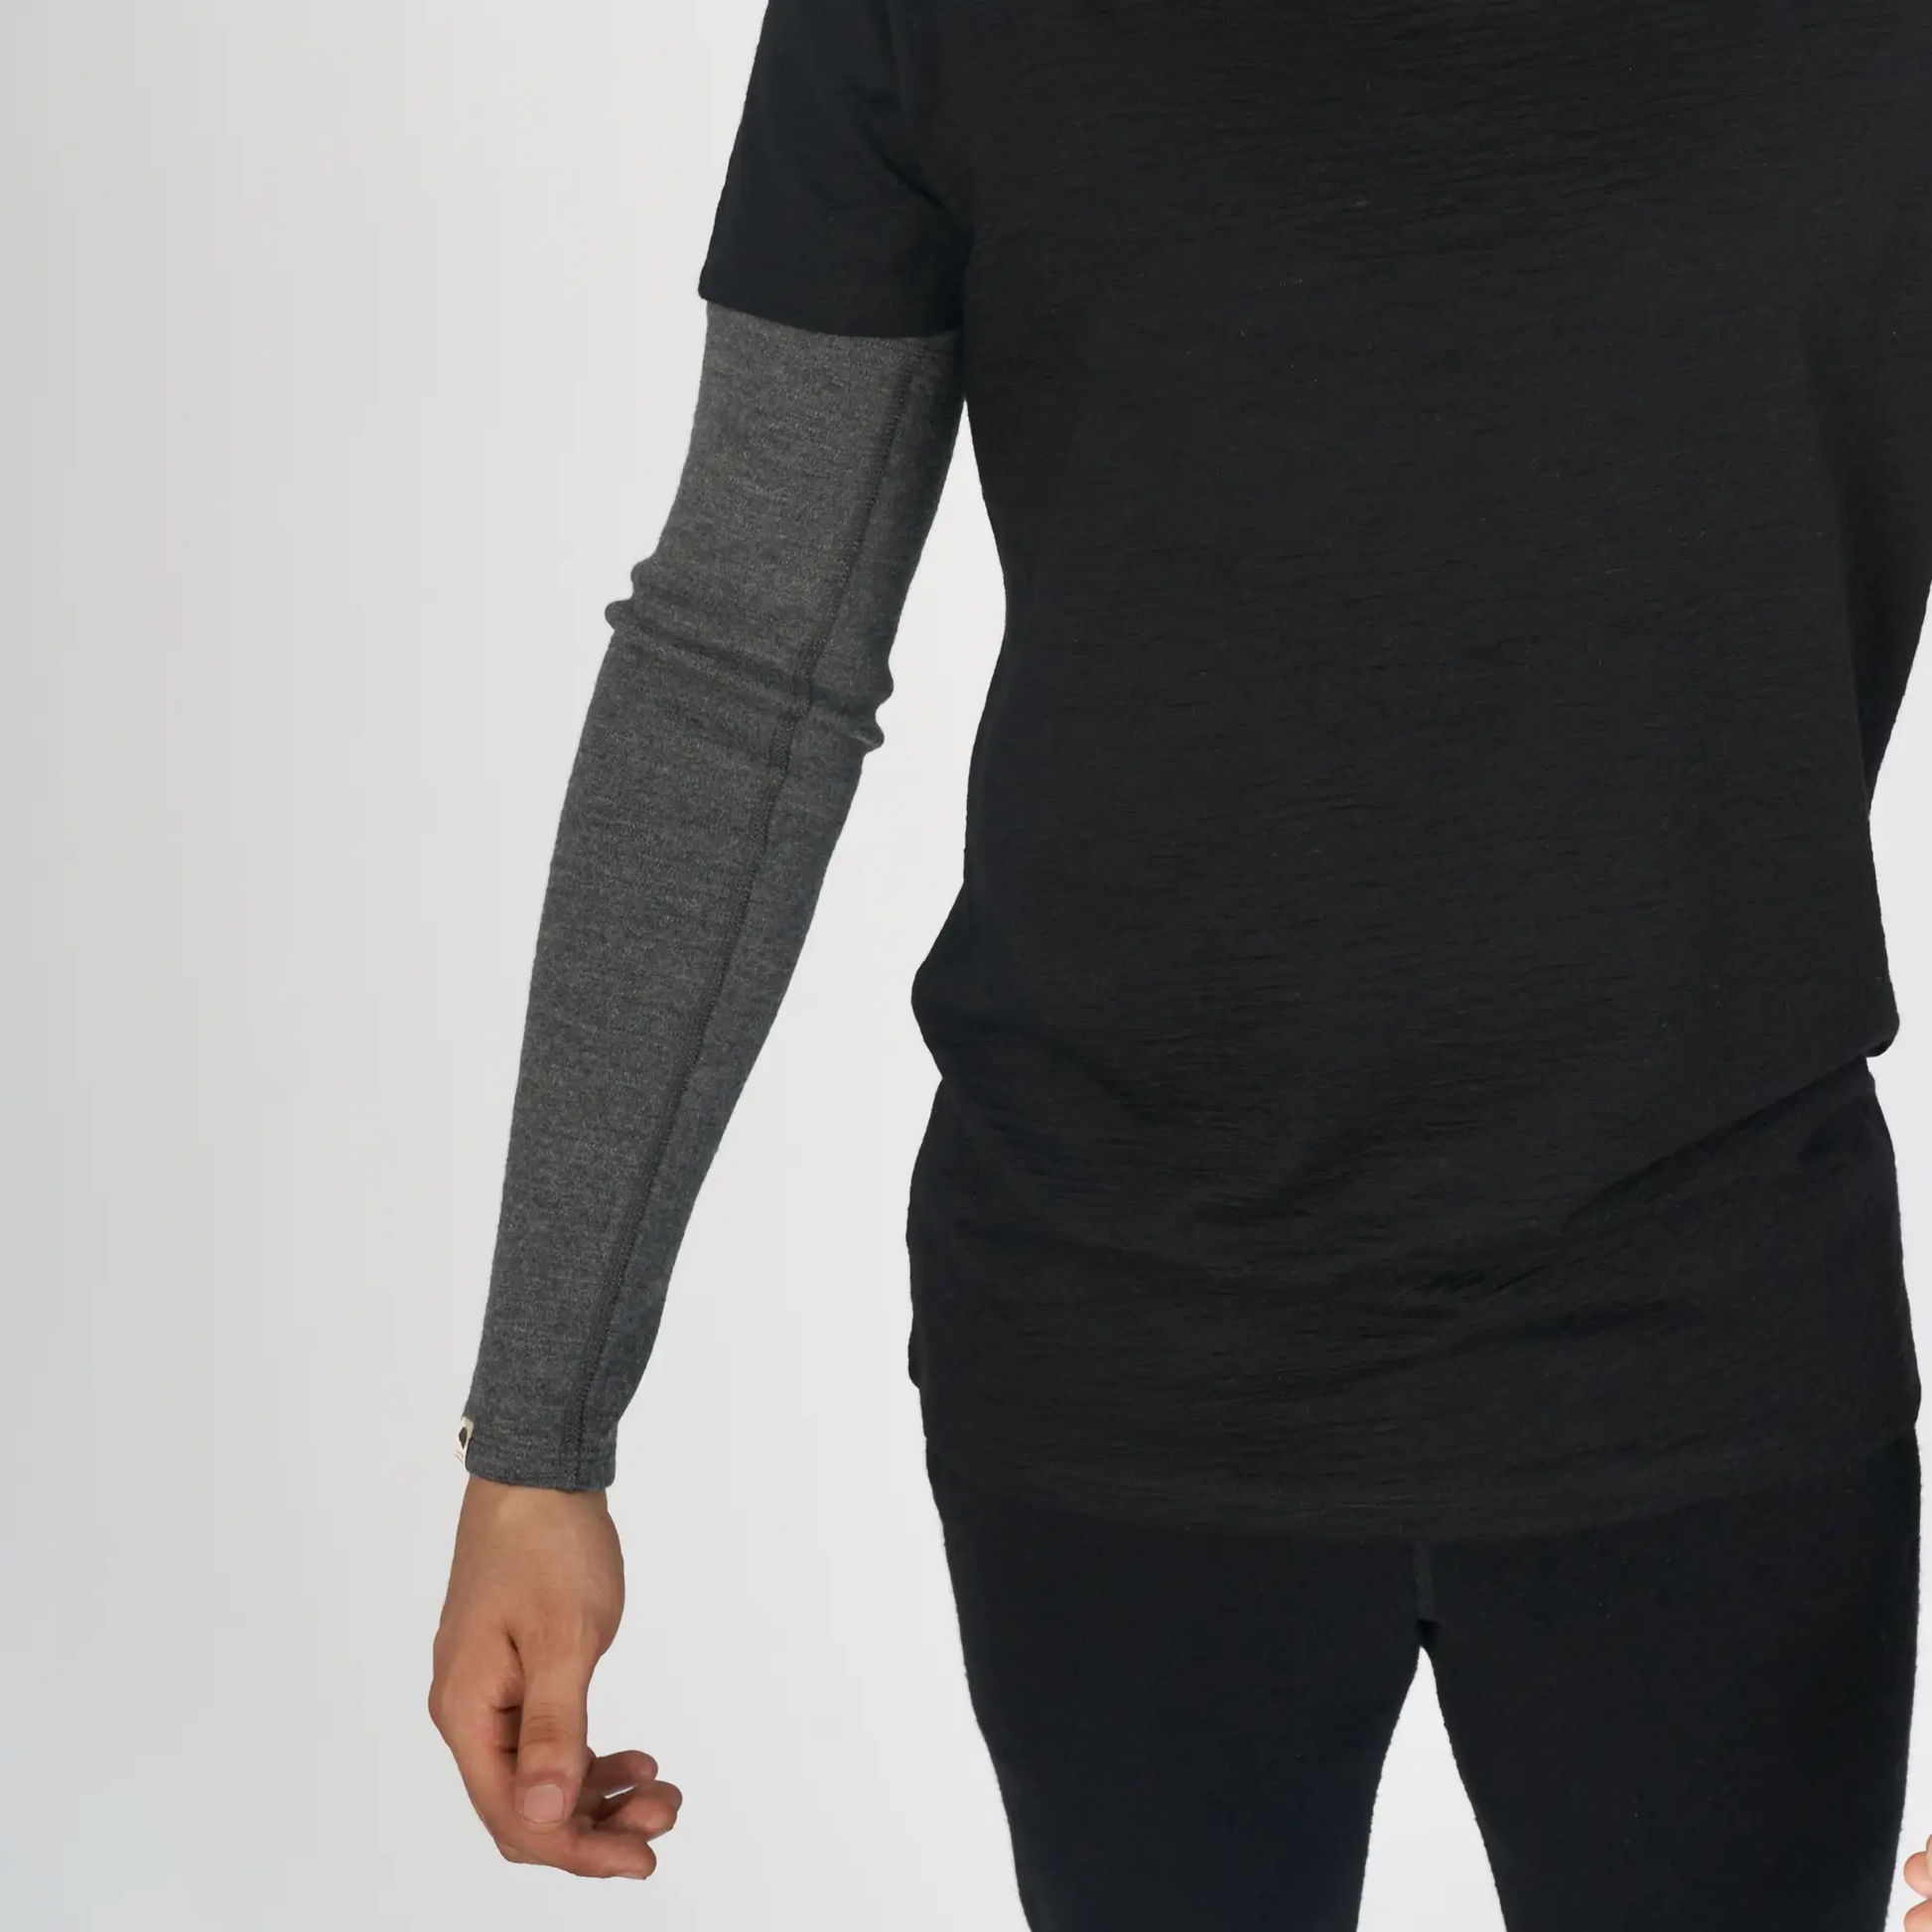 mens all natural sleeve lightweight color natural gray